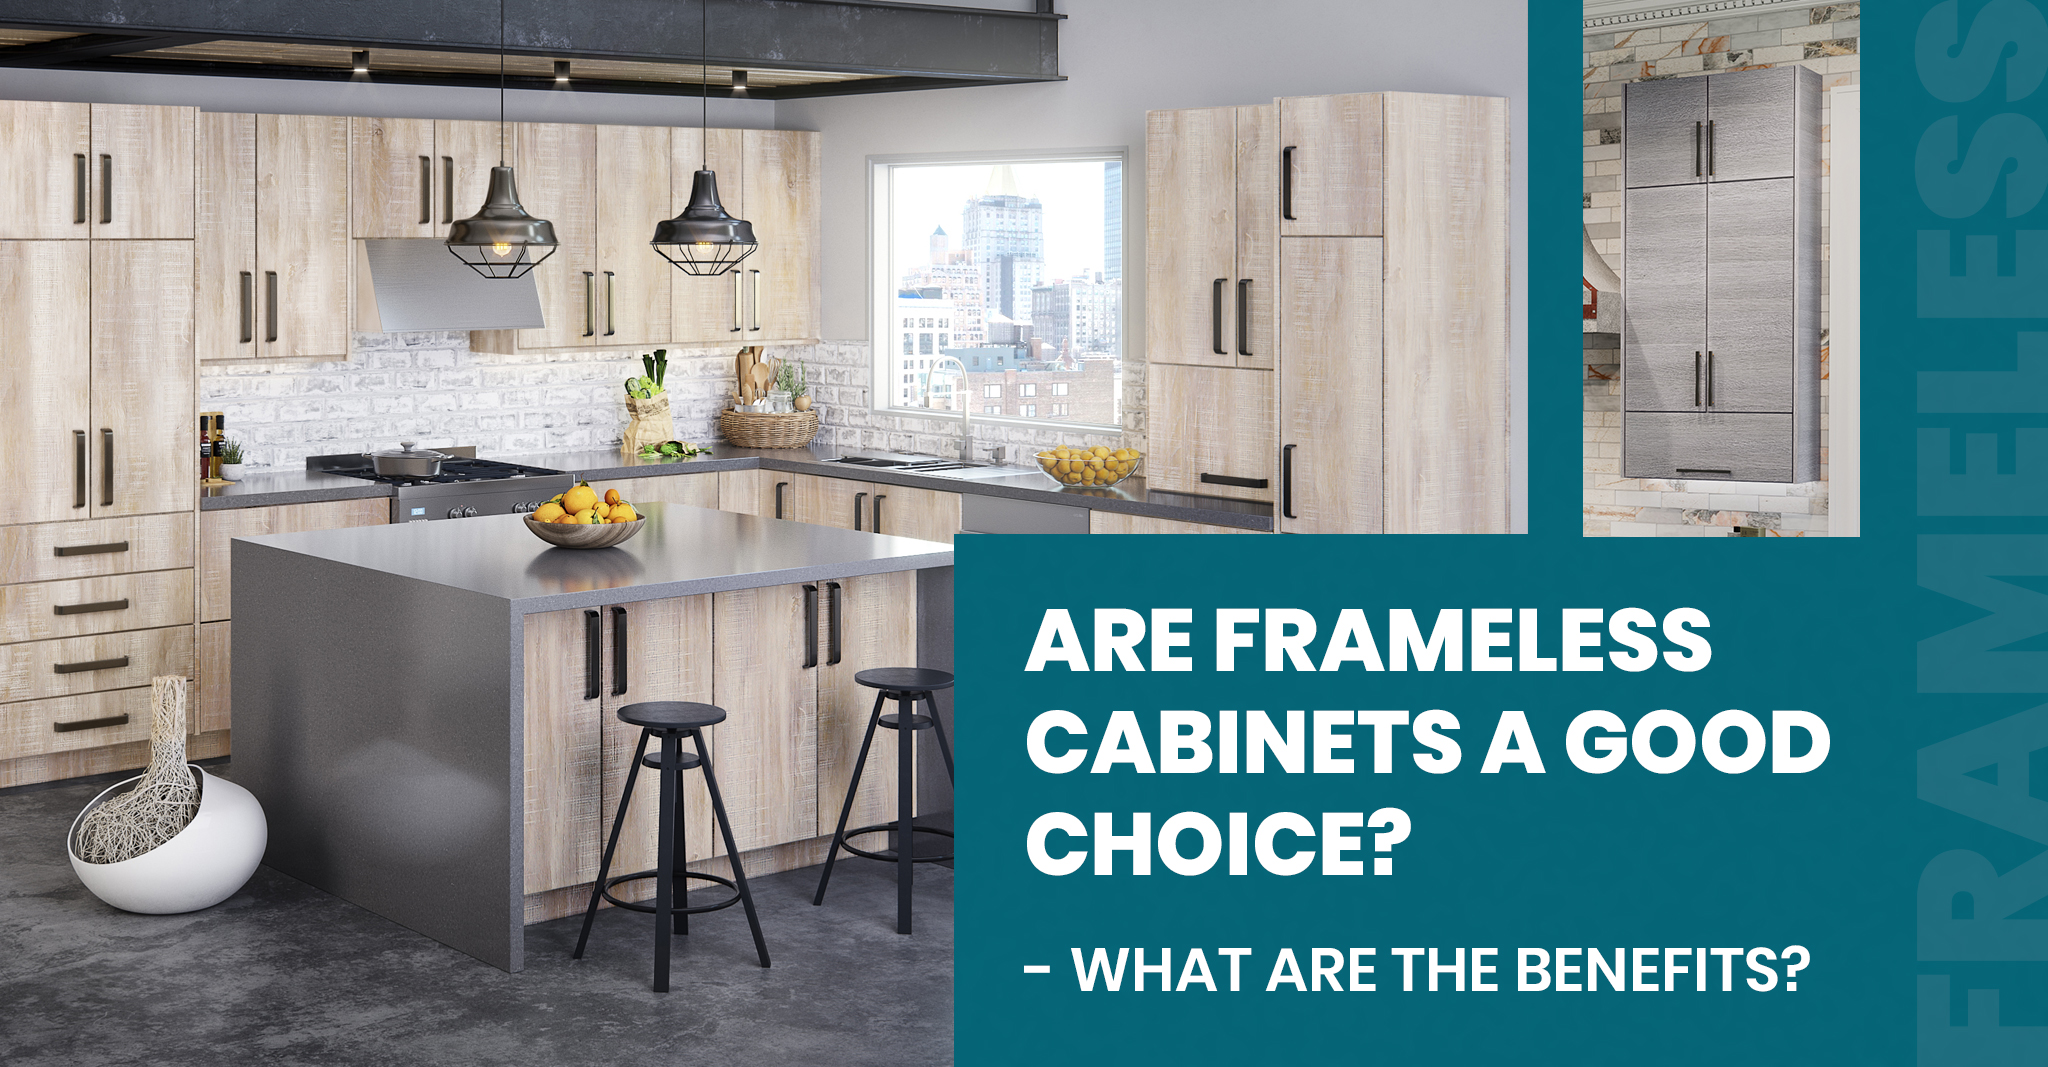 Why Choose Frameless Cabinets - What are the Benefits?